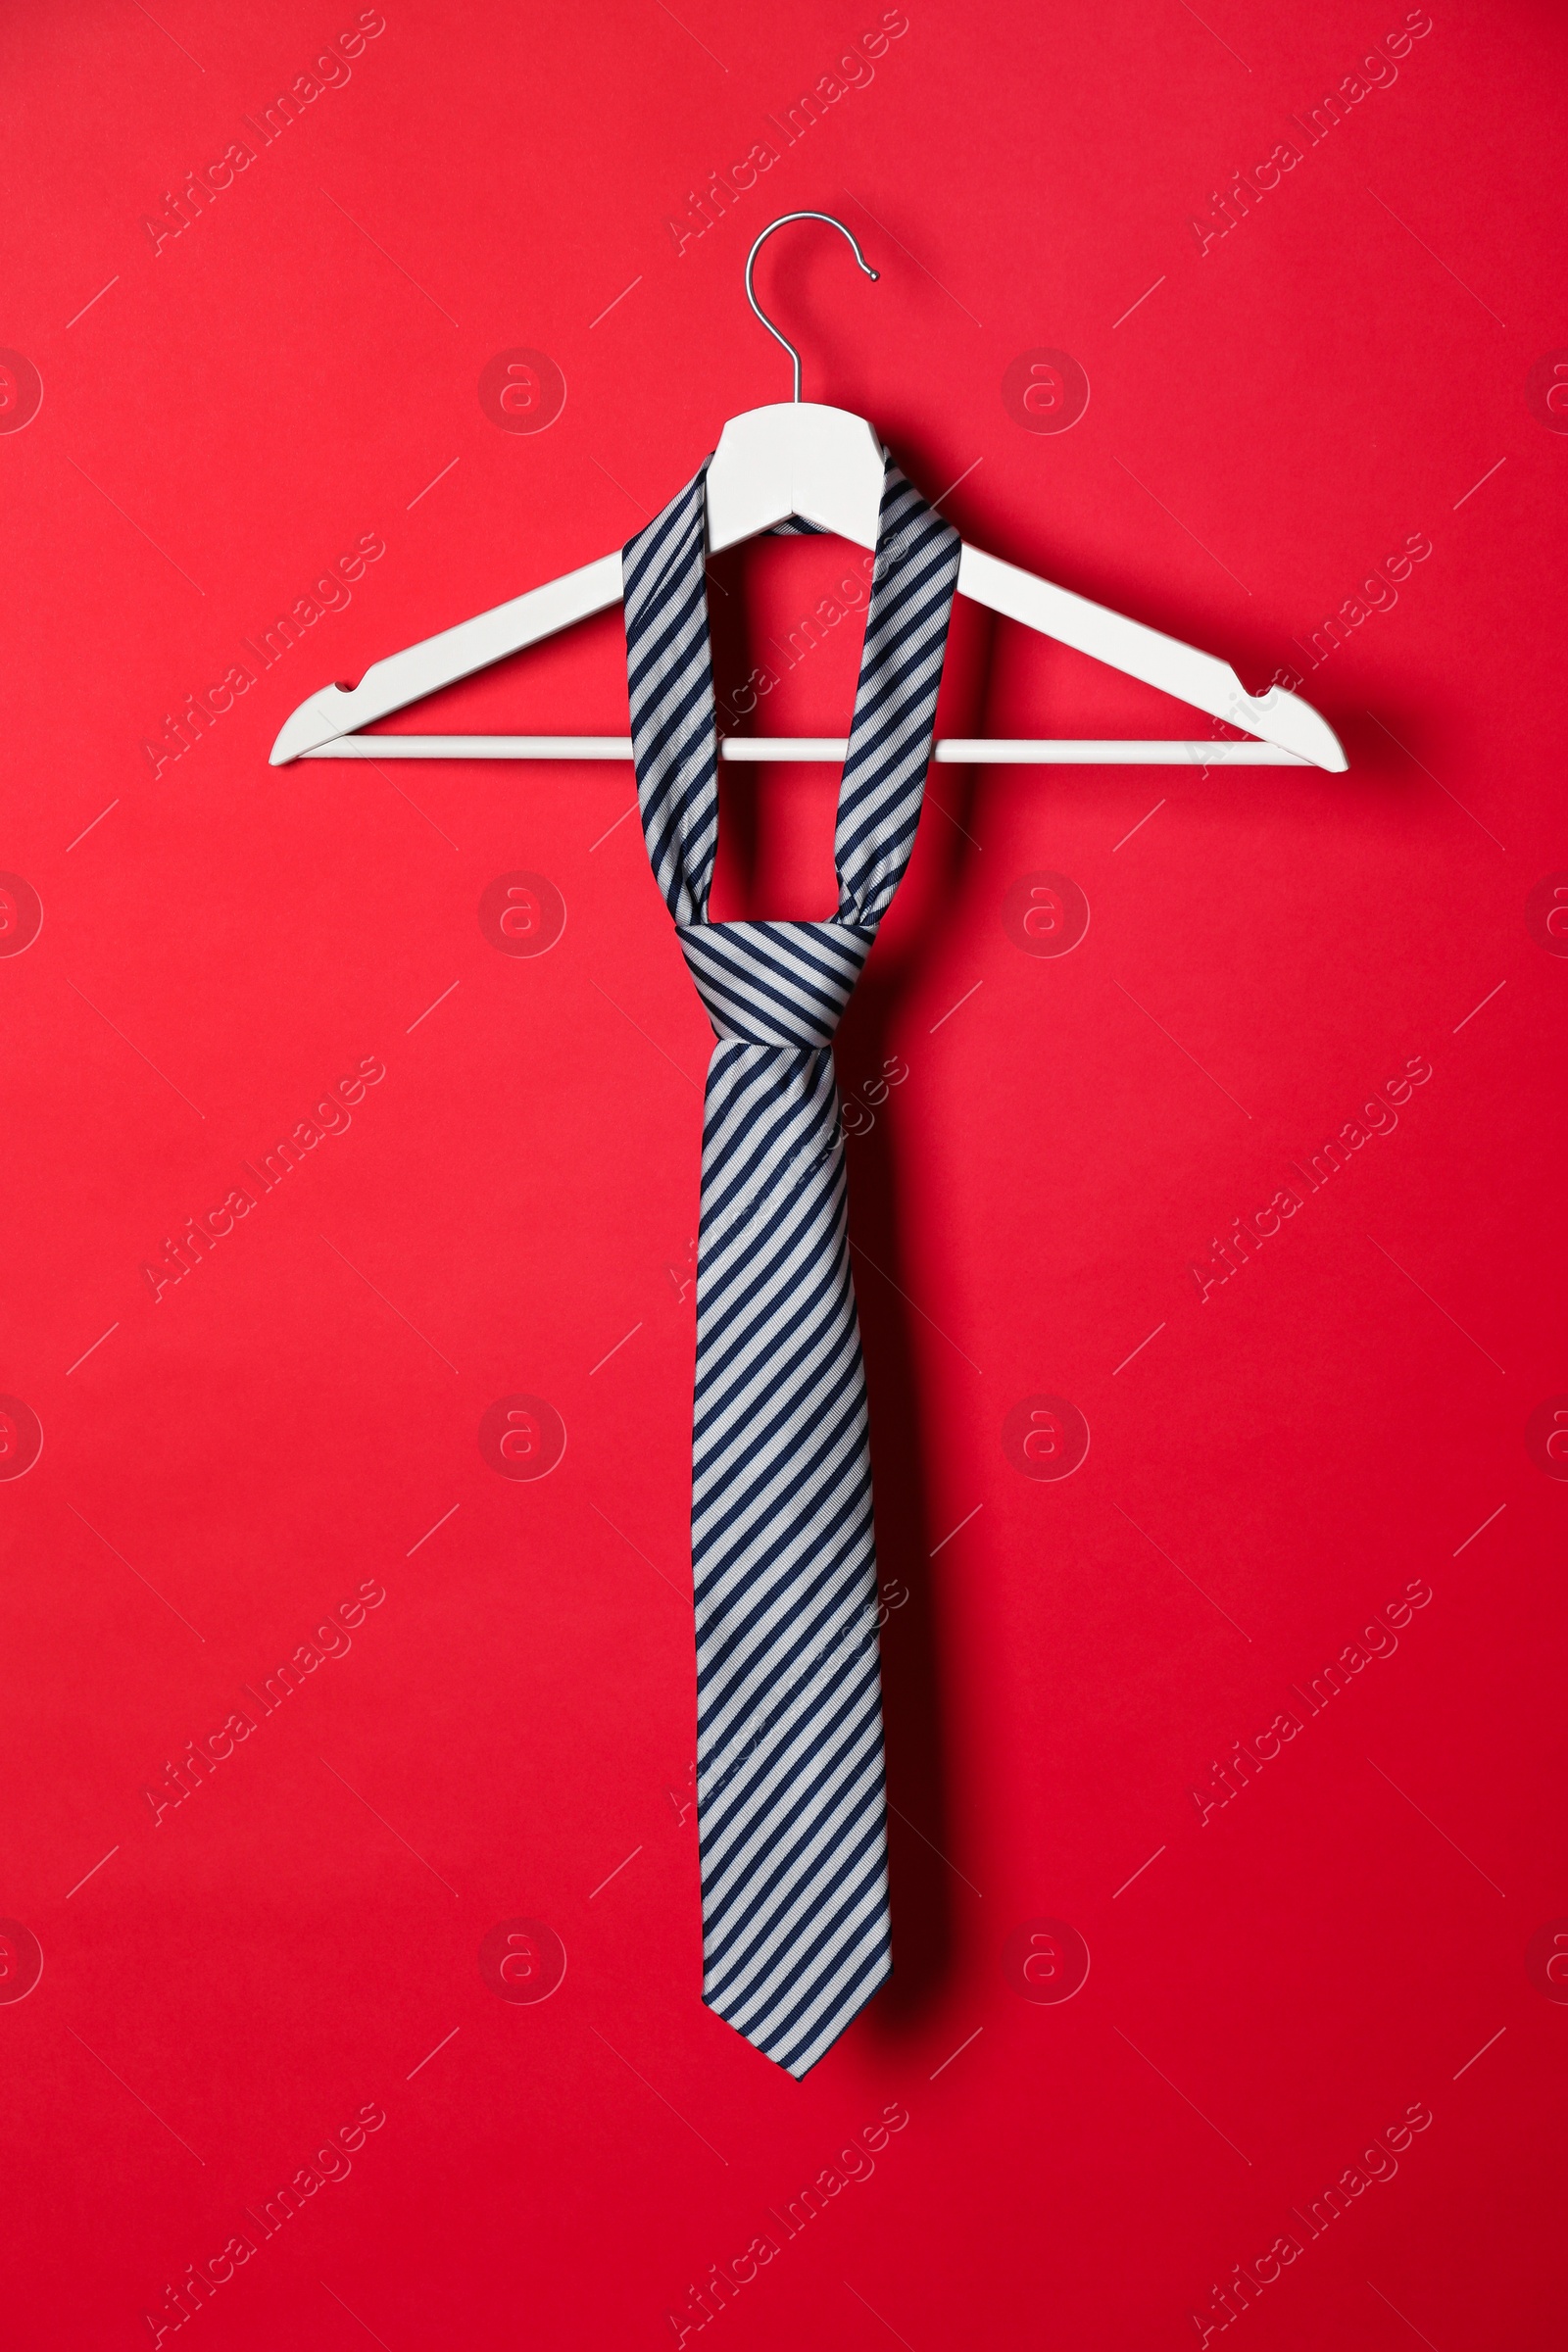 Photo of Hanger with striped tie on red background